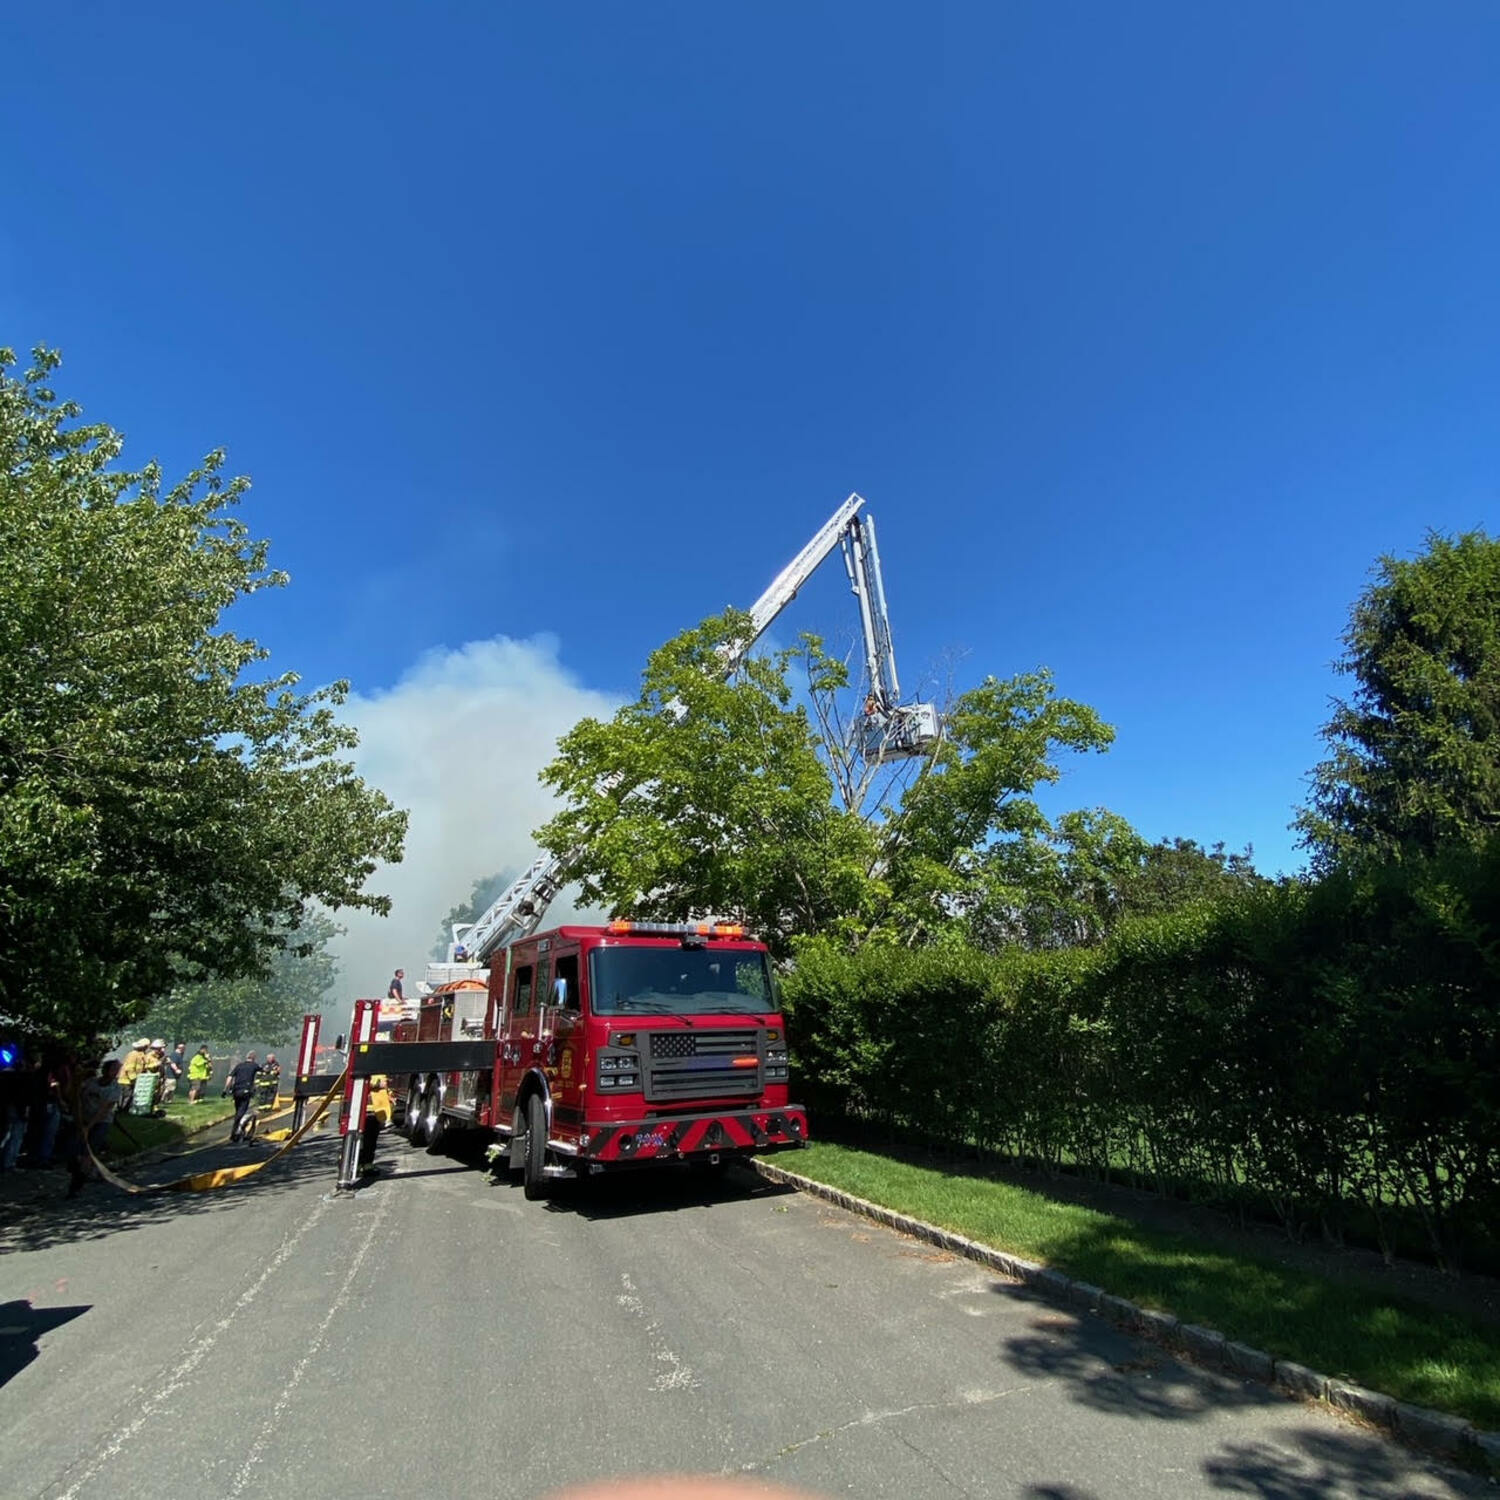 The Southampton Fire Department ladder truck was deployed to the scene of the Farmstead Lane fire in Water Mill Sunday afternoon.